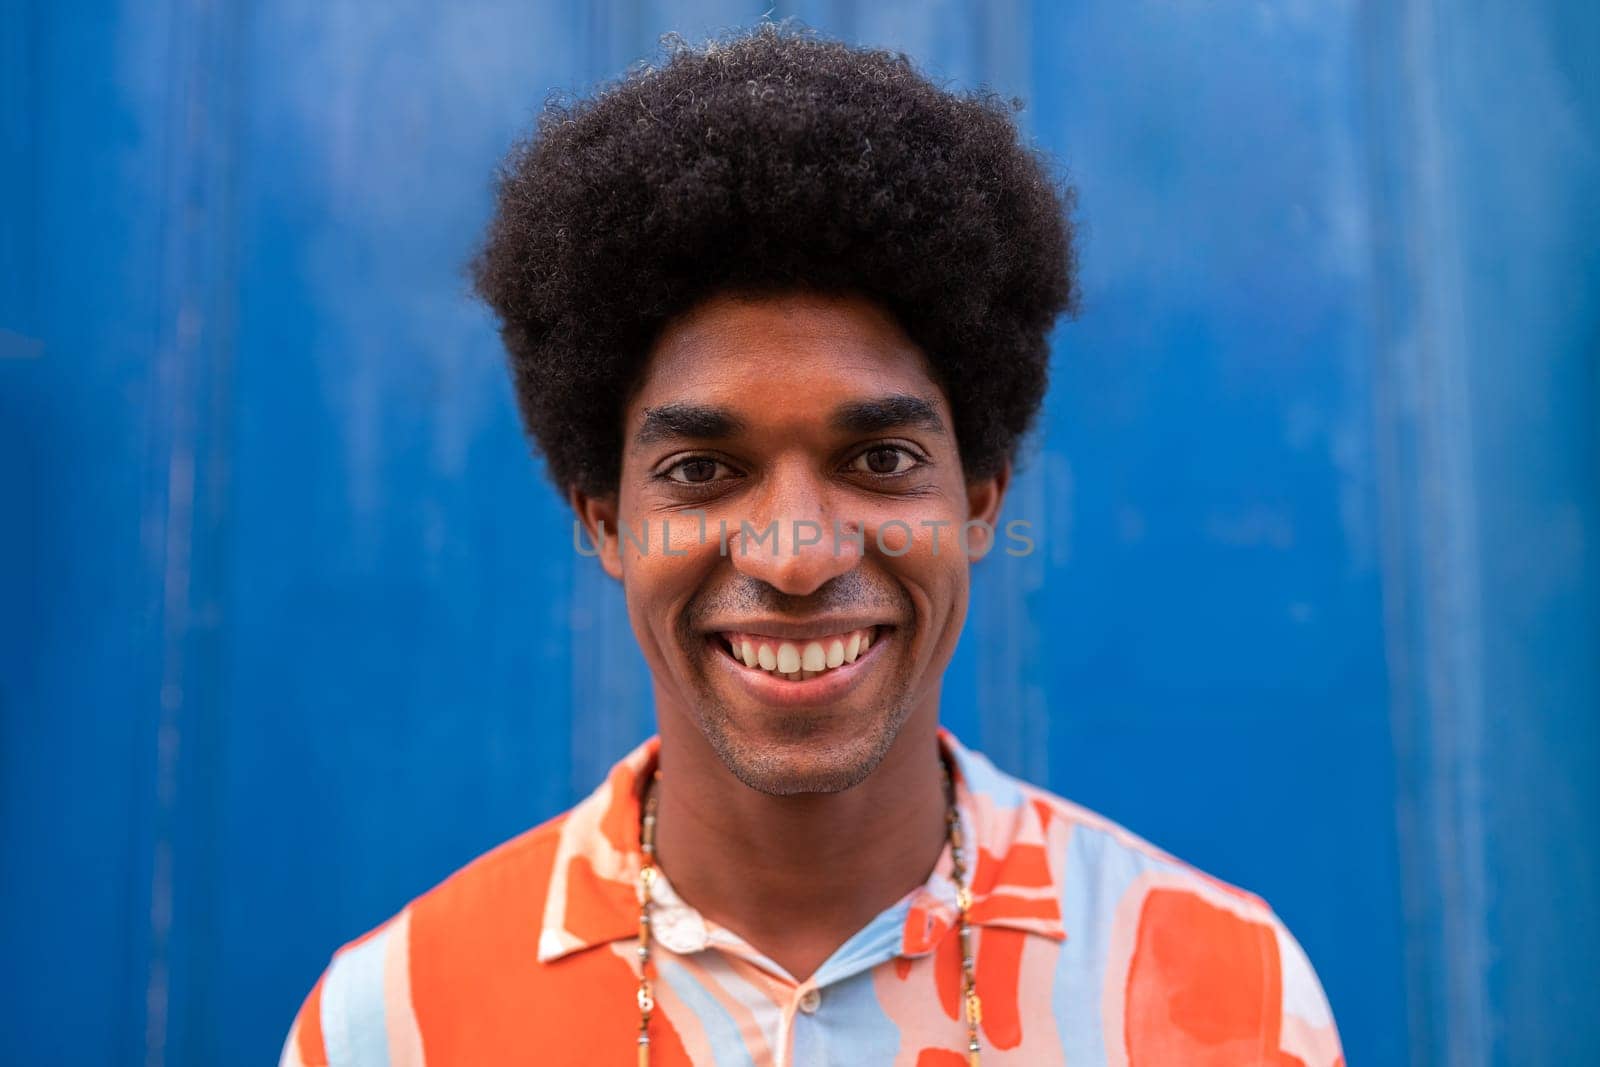 Headshot of smiling young African American man with afro hairstyle looking at camera. Lifestyle concept.